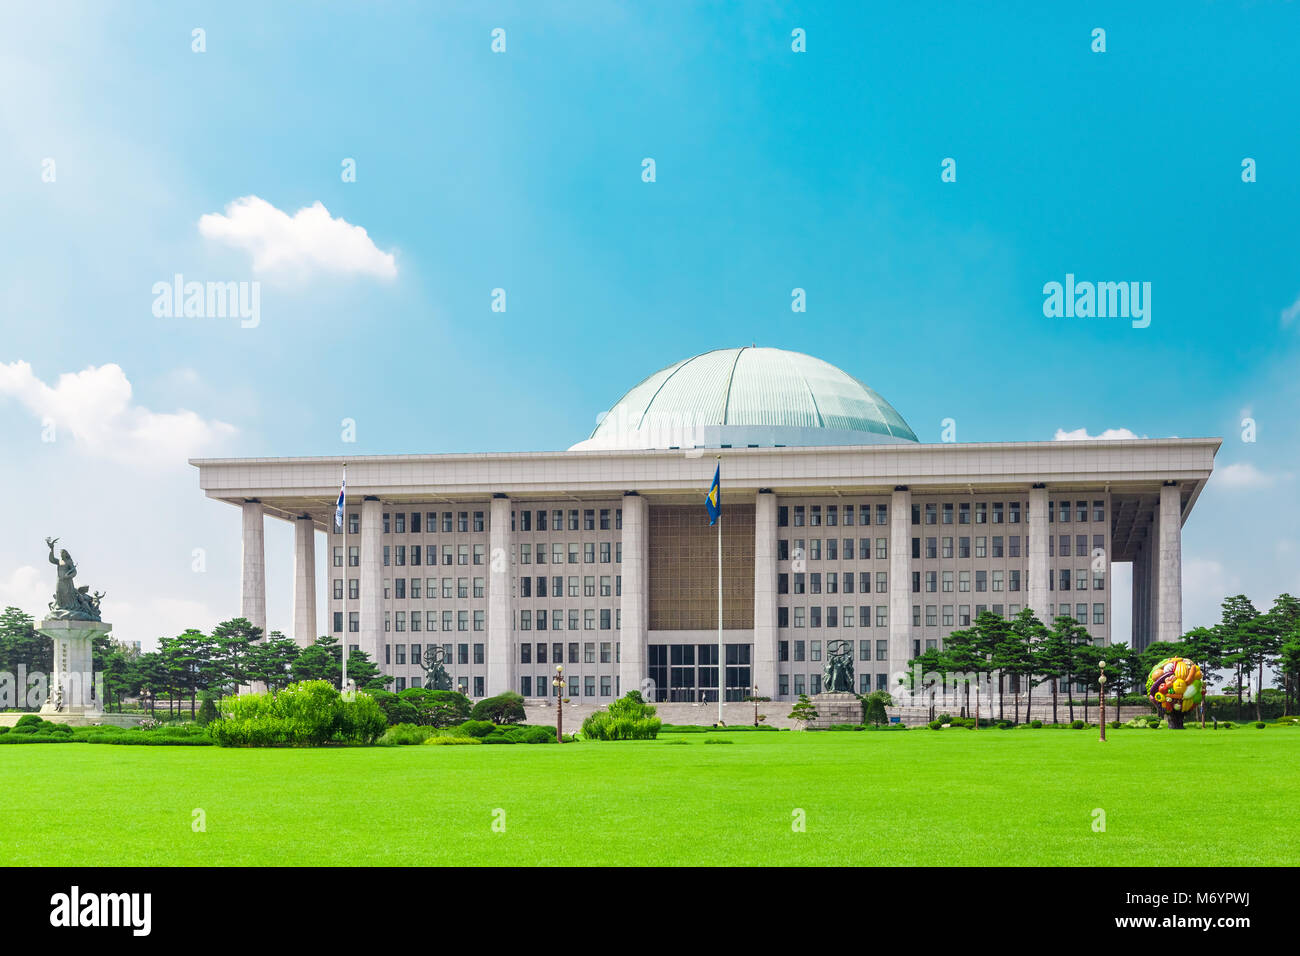 SEOUL, KOREA - AUGUST 14, 2015: Building of National Assembly Proceeding Hall - Capitol building of South Korean Republic, located on Yeouido island - Stock Photo